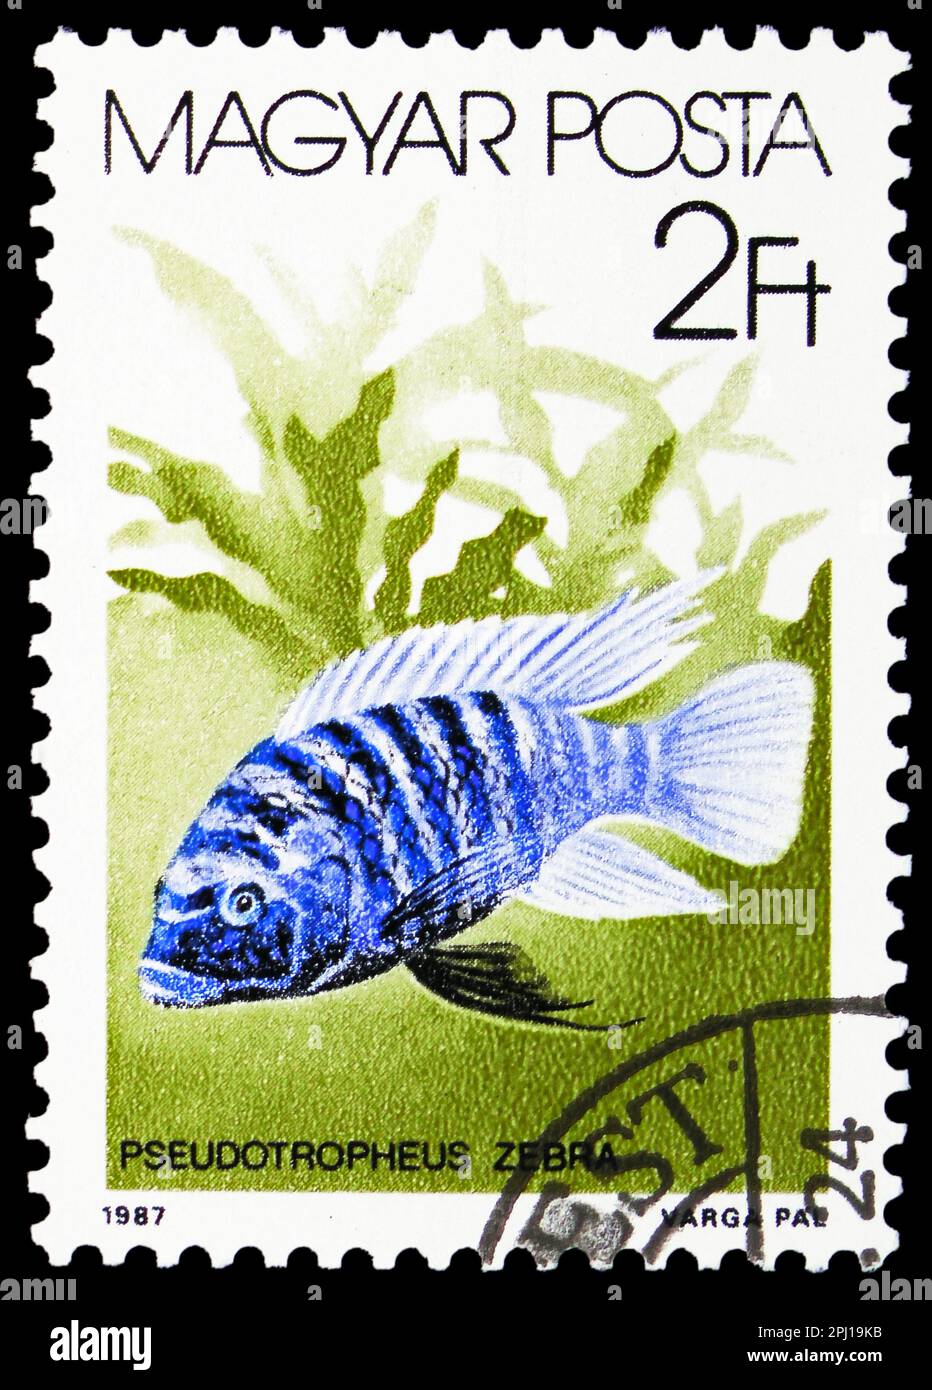 MOSCOW, RUSSIA - MARCH 25, 2023: Postage stamp printed in Hungary shows Zebra Mbuna (Pseudotropheus zebra), Fishes (1987) serie, circa 1987 Stock Photo